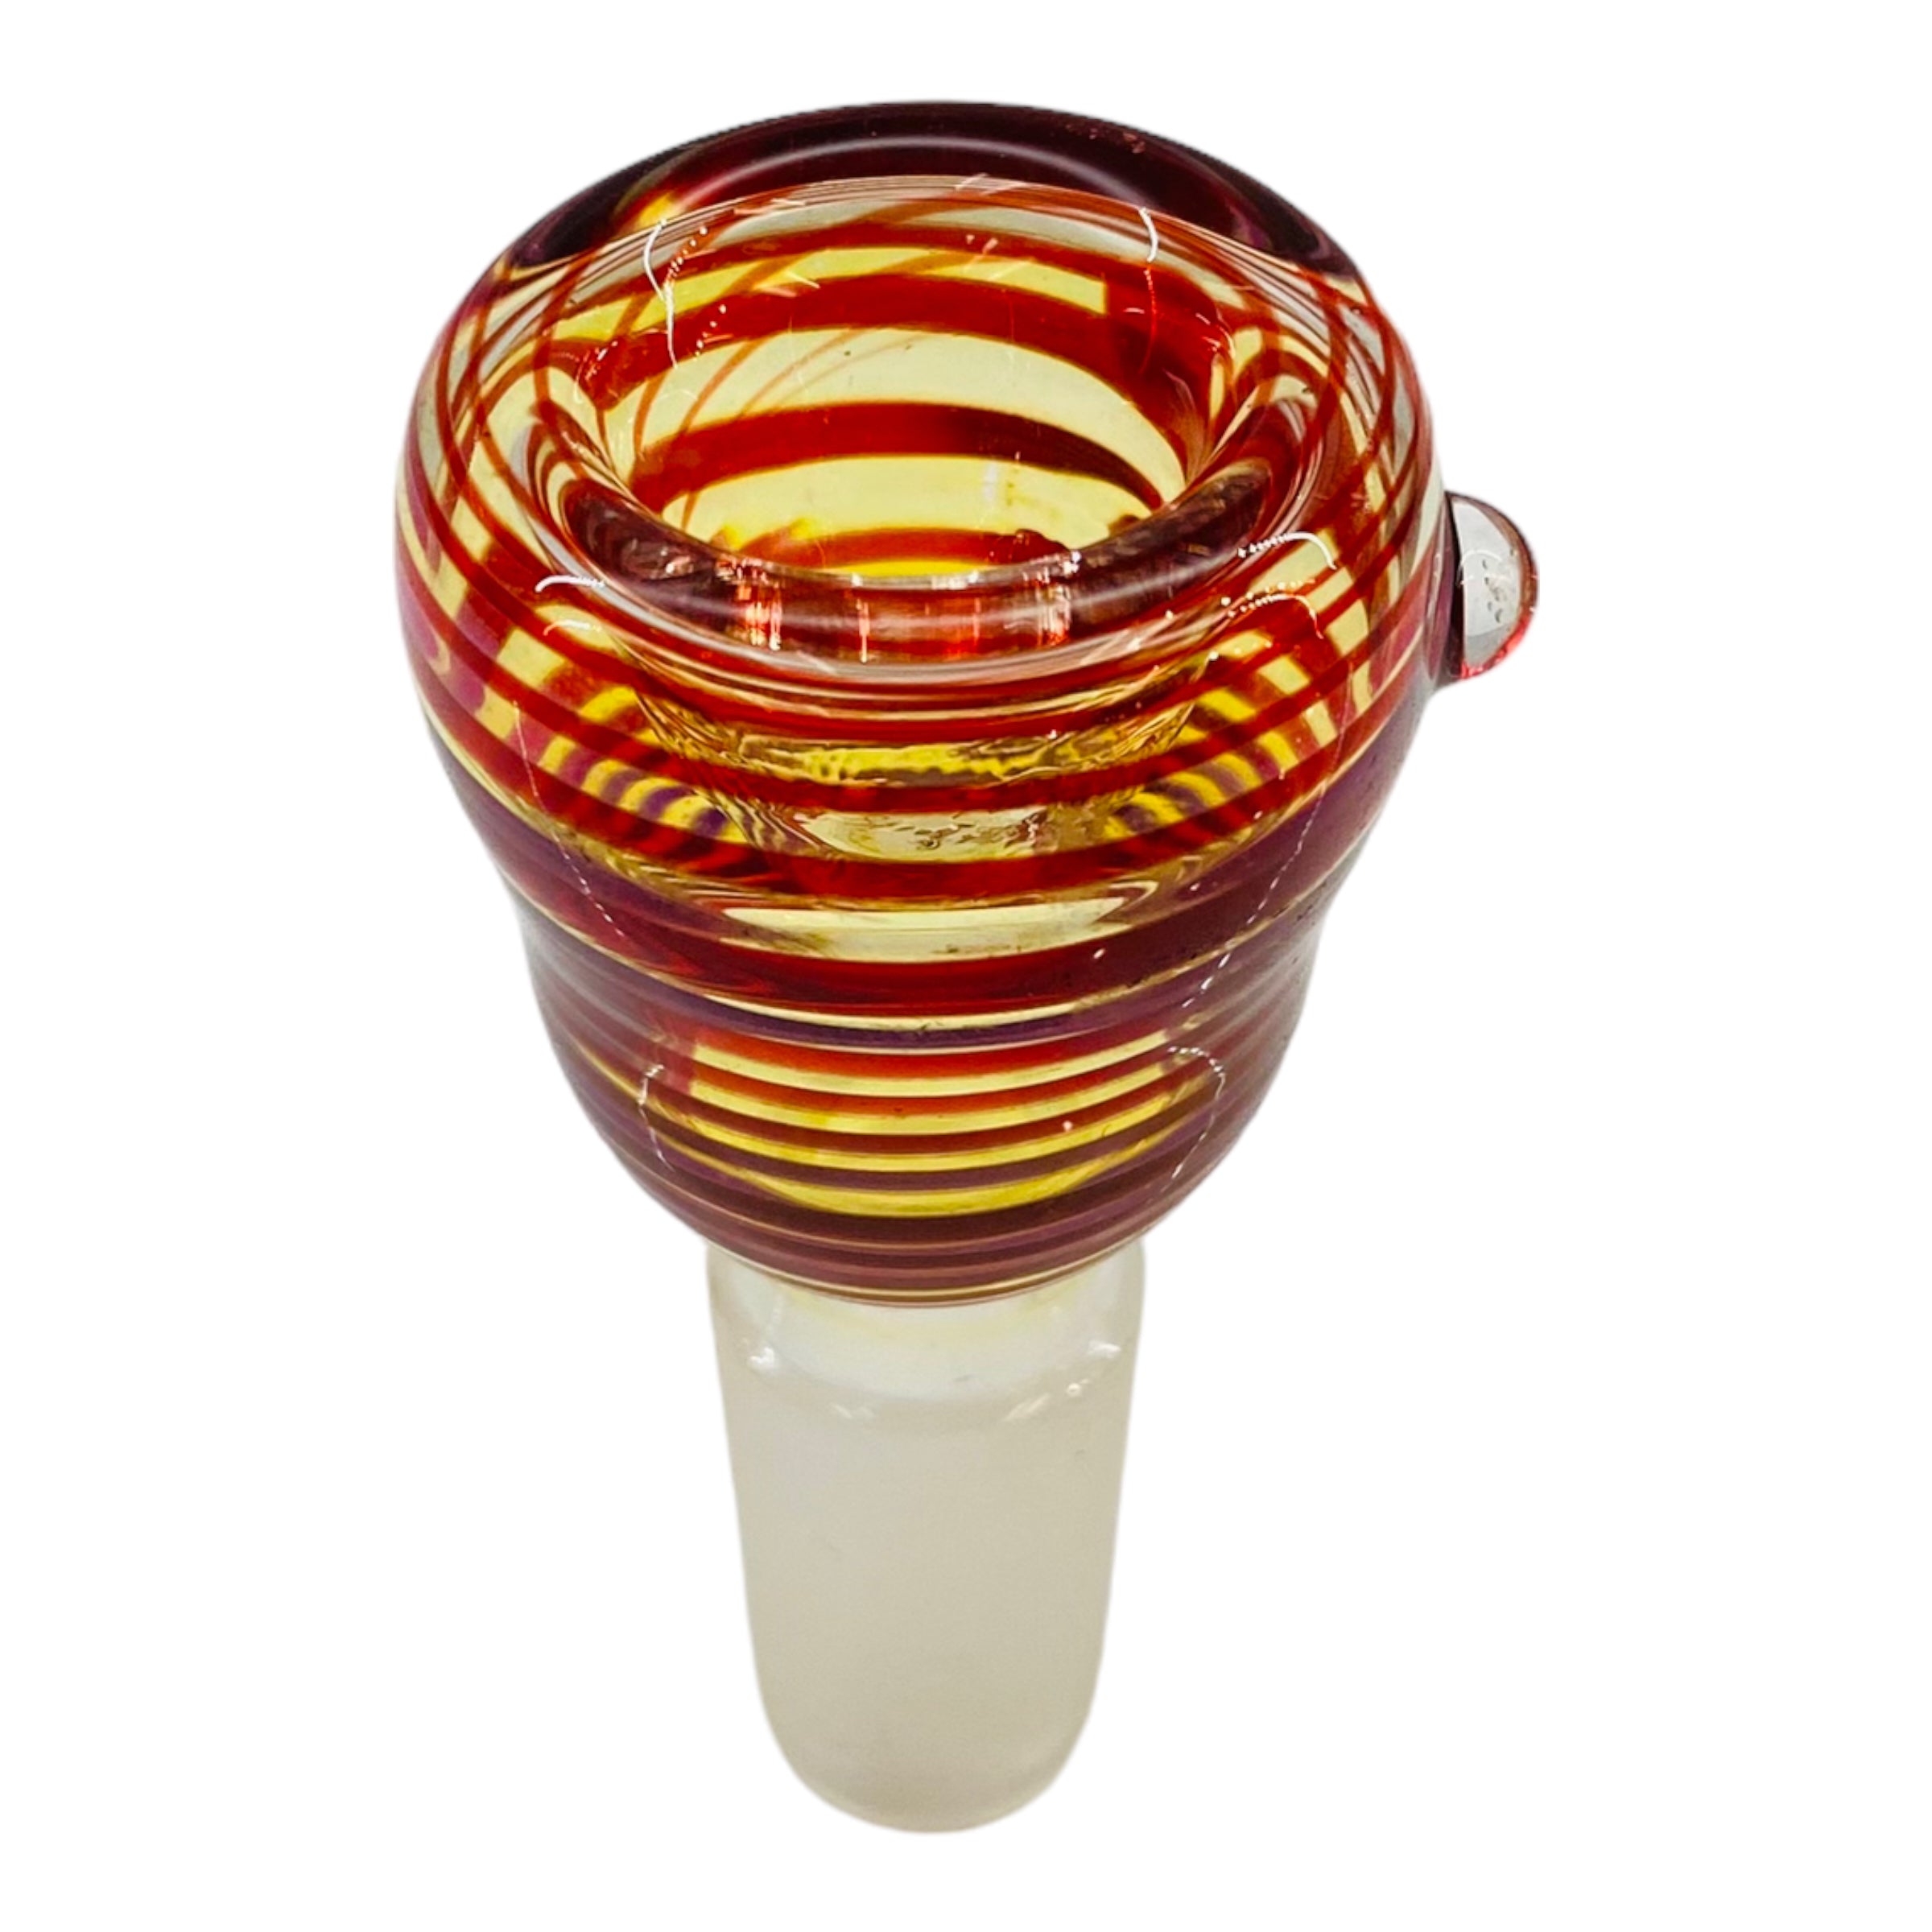 14mm Flower Bowl - Tall Color Bubble Twist Bong Bowl - Red